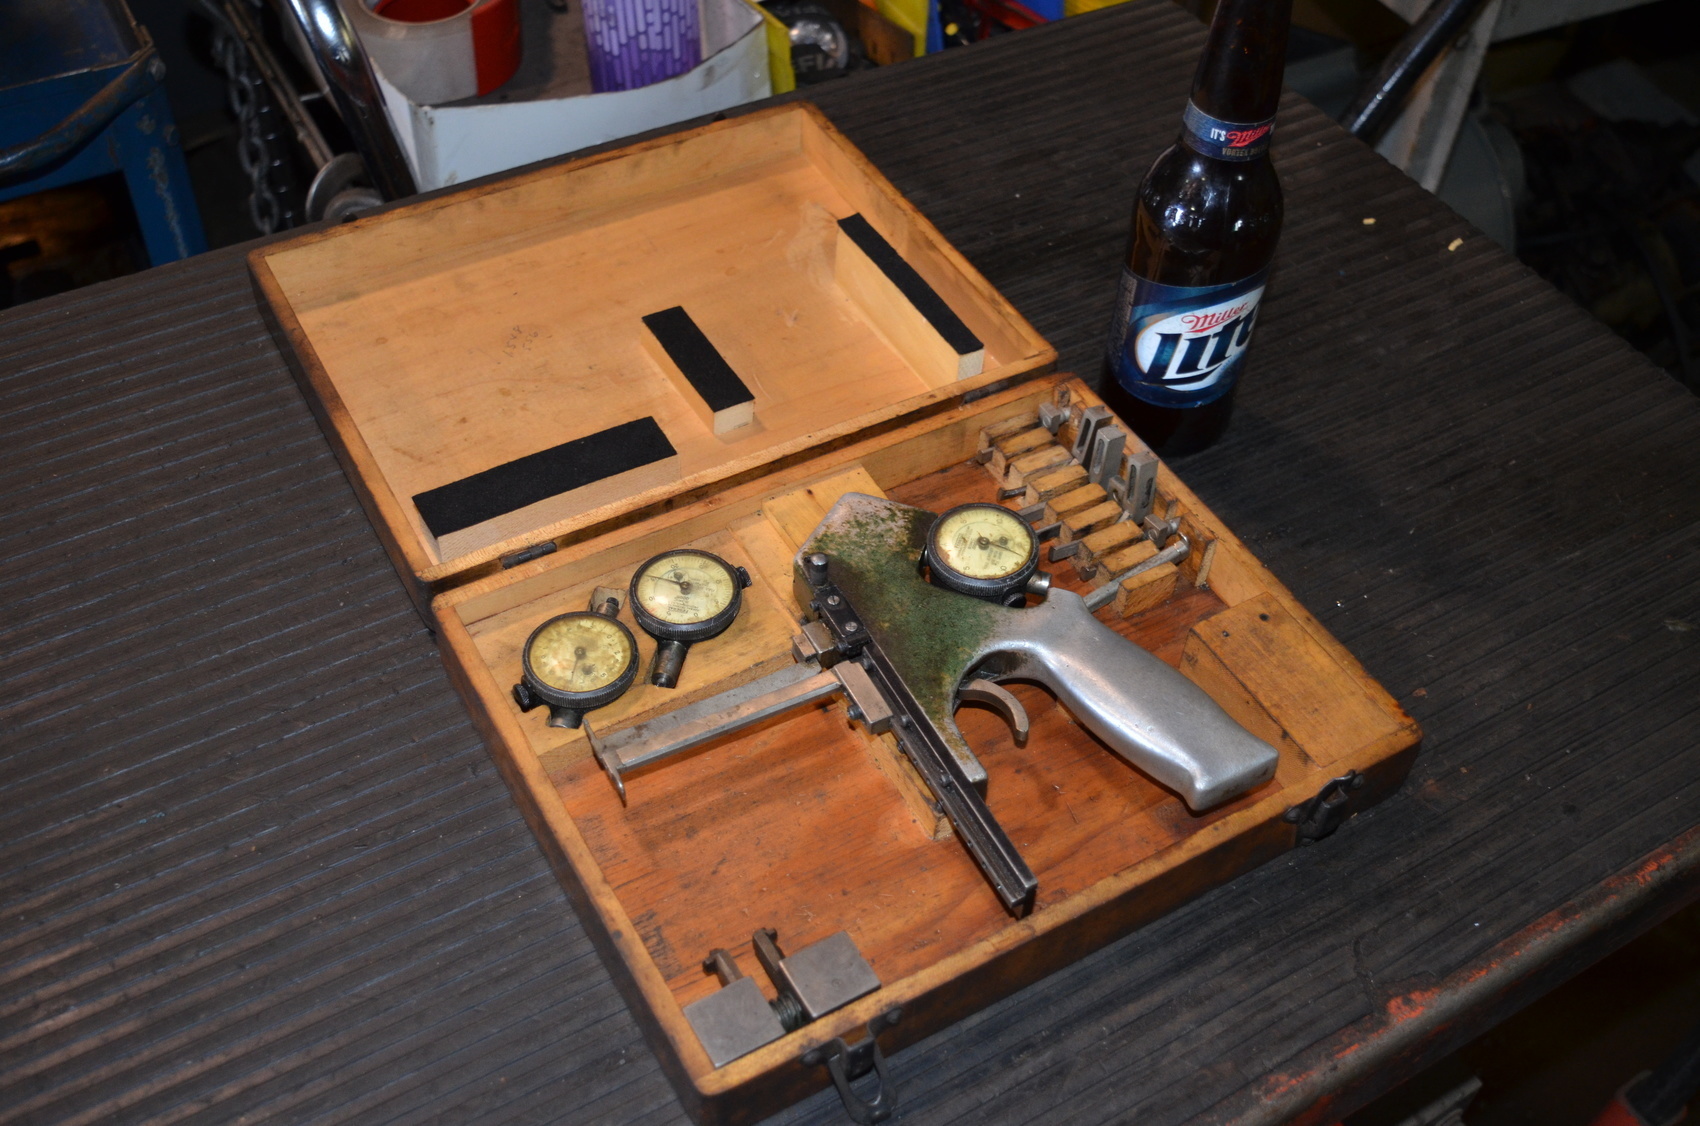 Federal AT-23 Inside Caliper Micrometer Gage Set in a wooden case